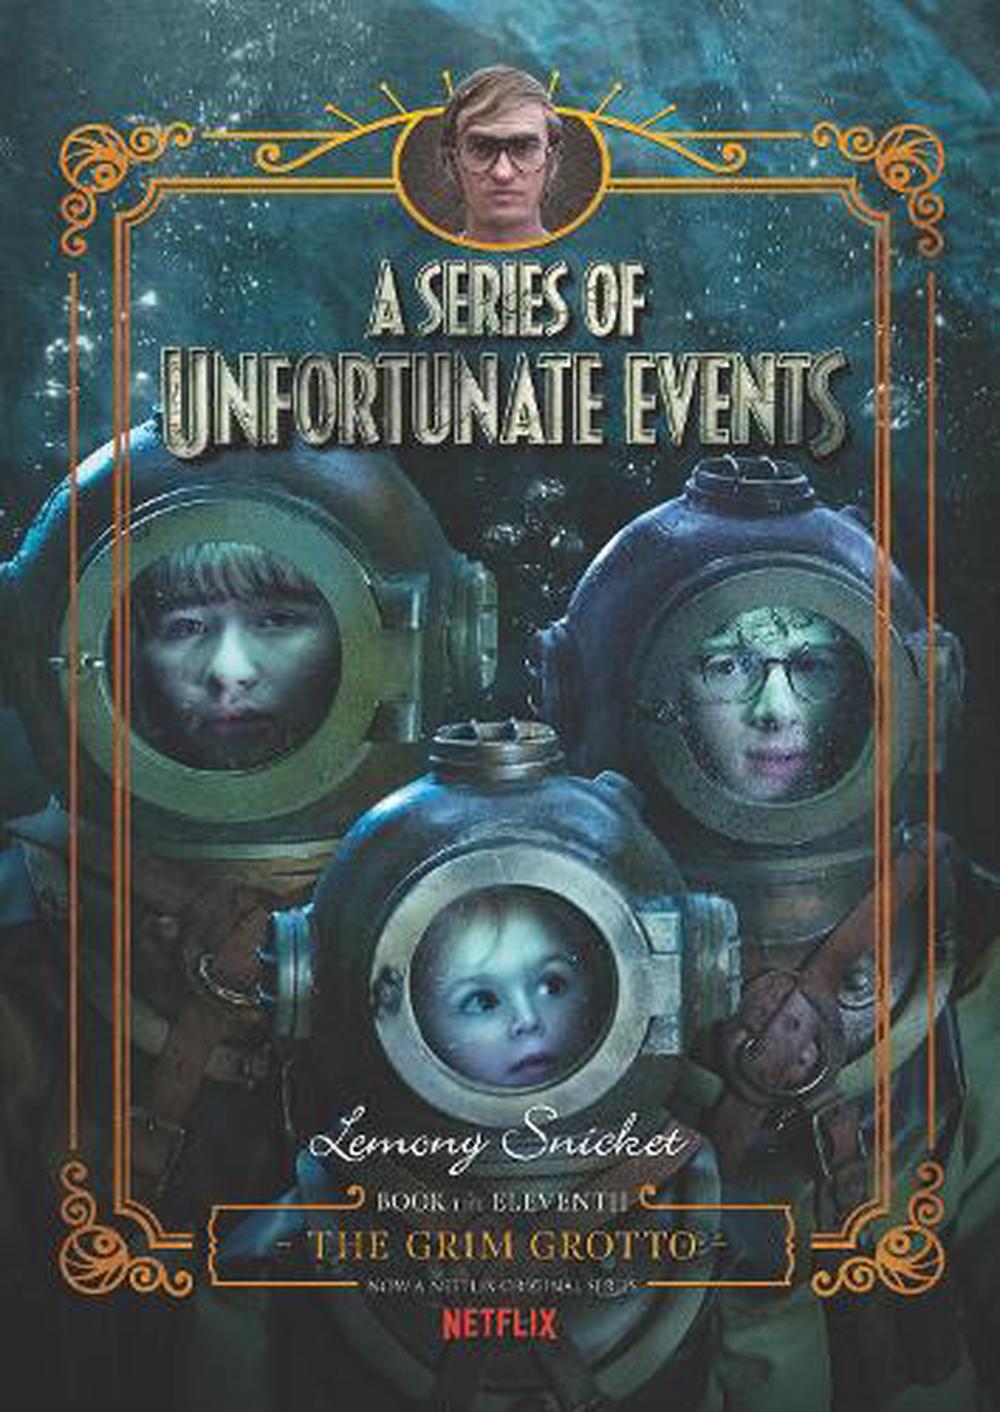 A Series of Unfortunate Events 11 by Lemony Snicket, Hardcover